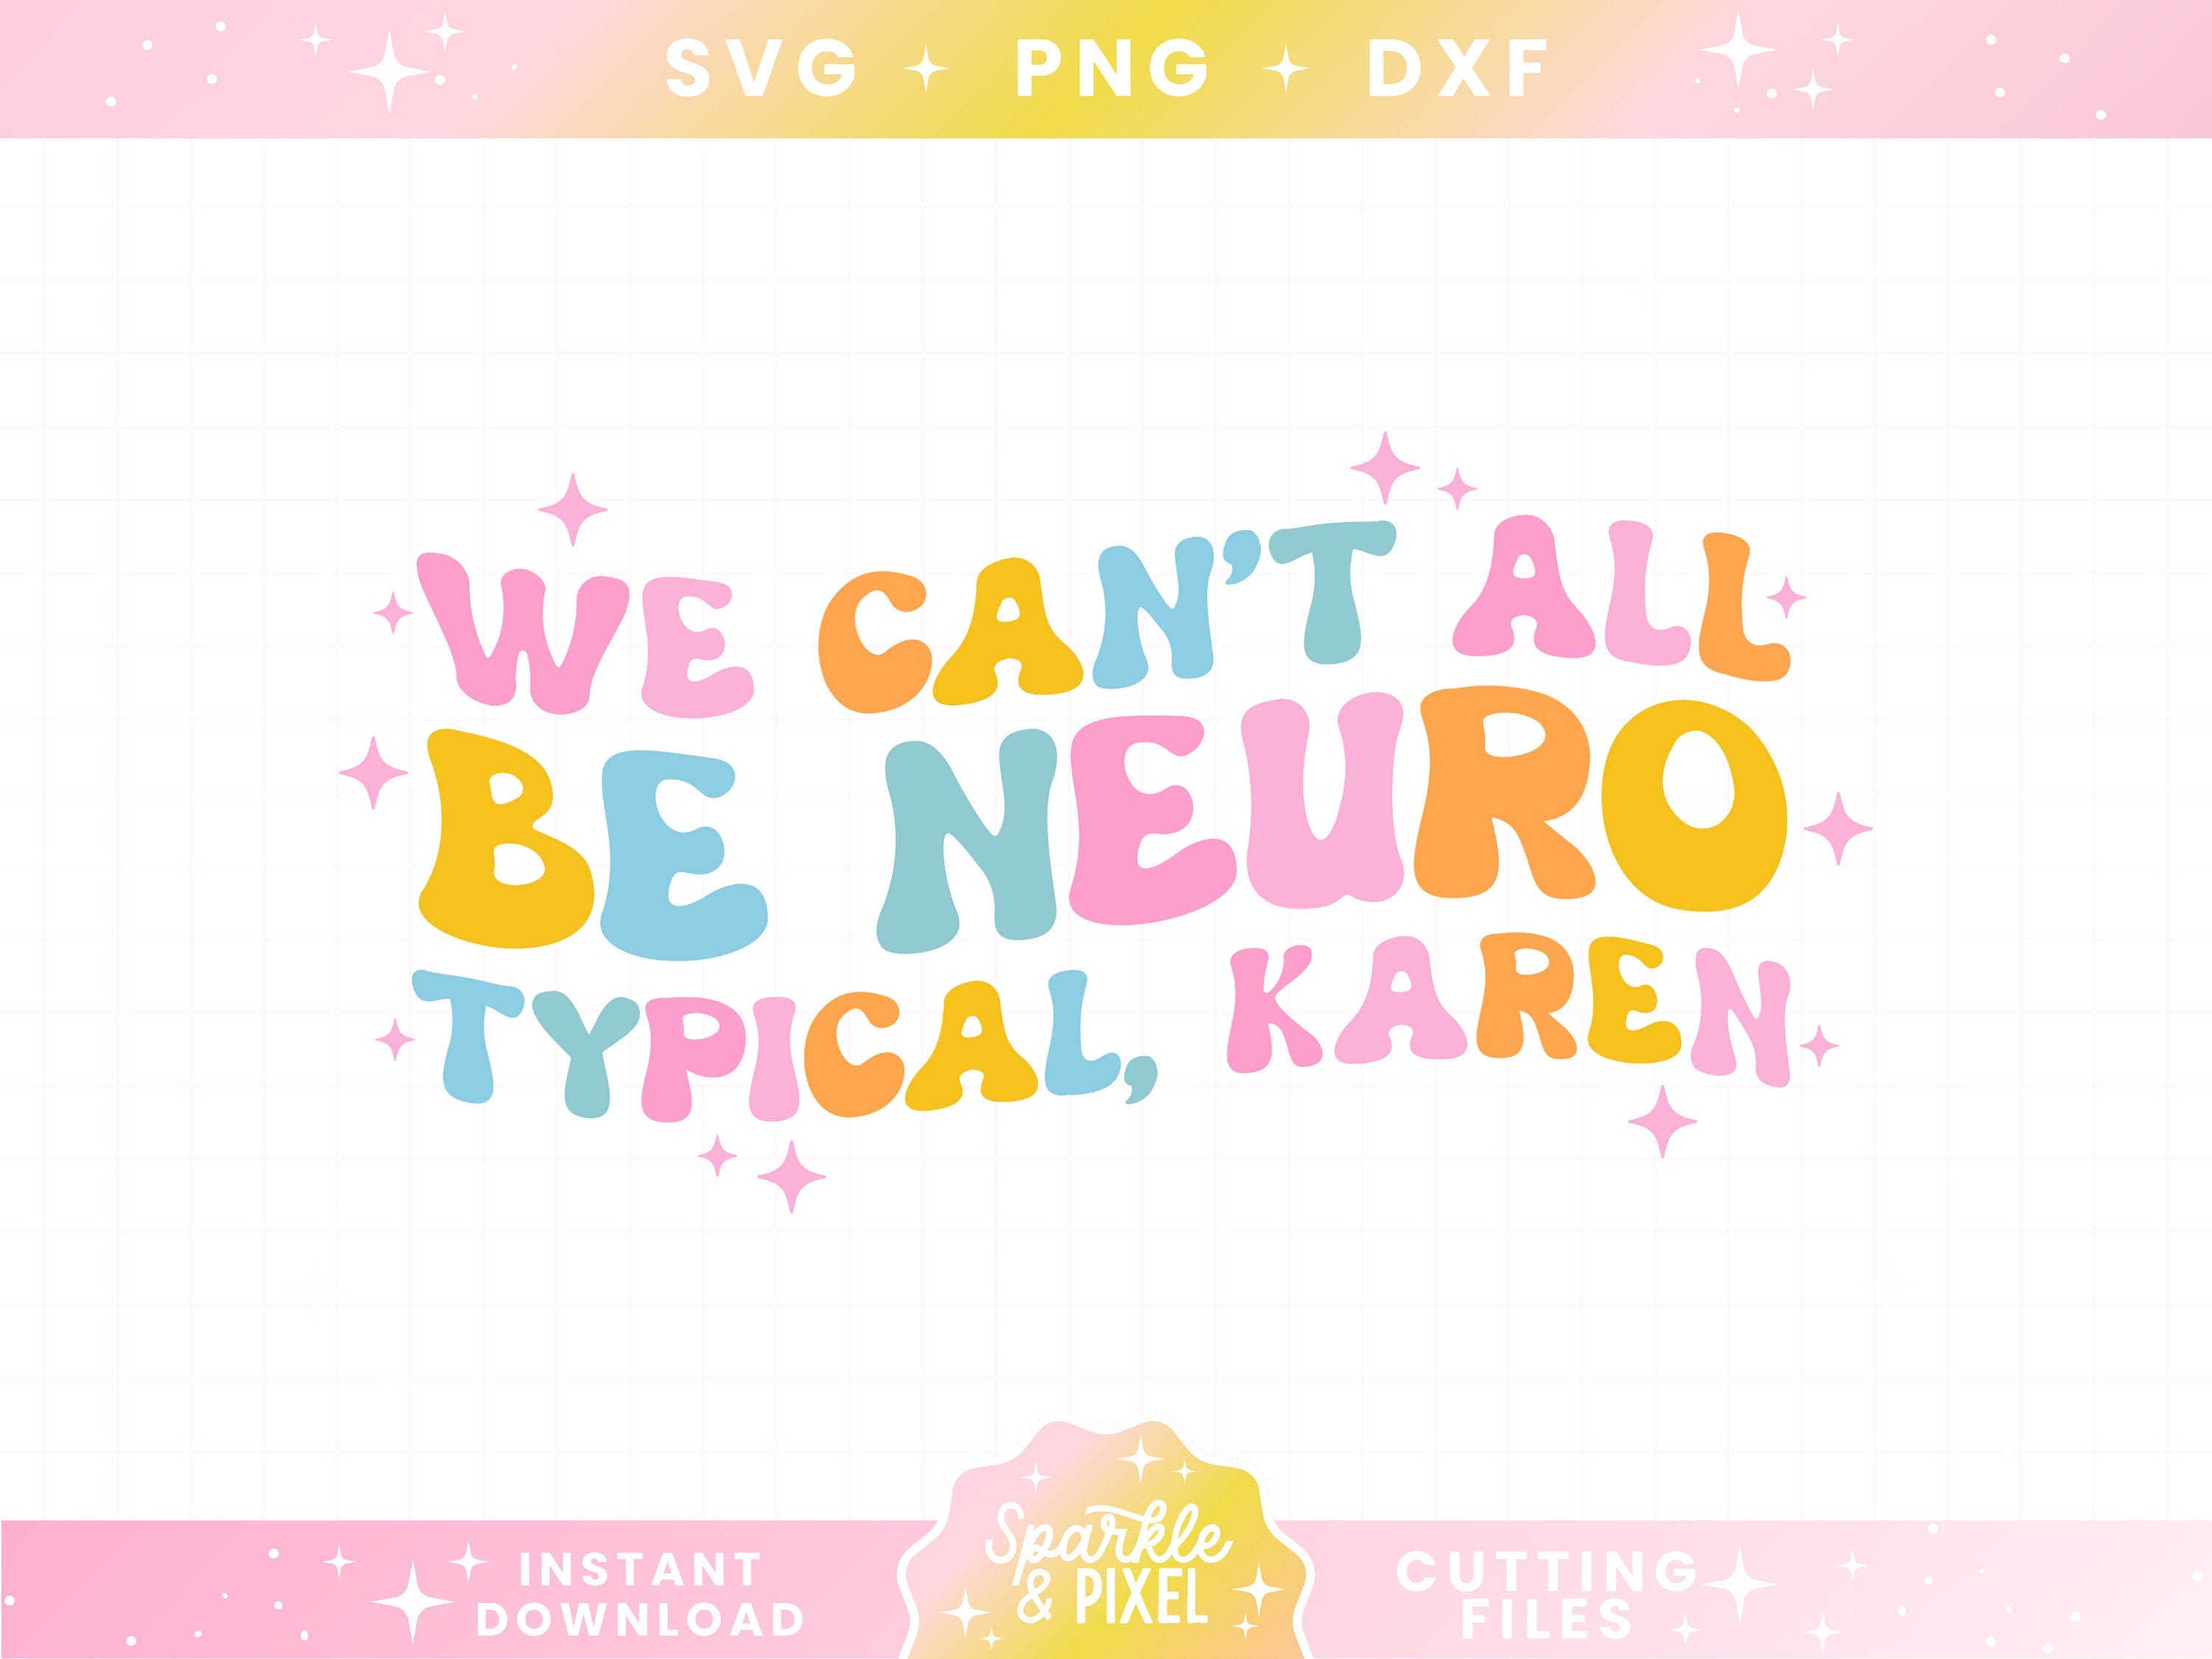 Sarcastic Neurodiversity SVG PNG DXF Files, Instant Download Trendy Digital Design Free Commercial Use